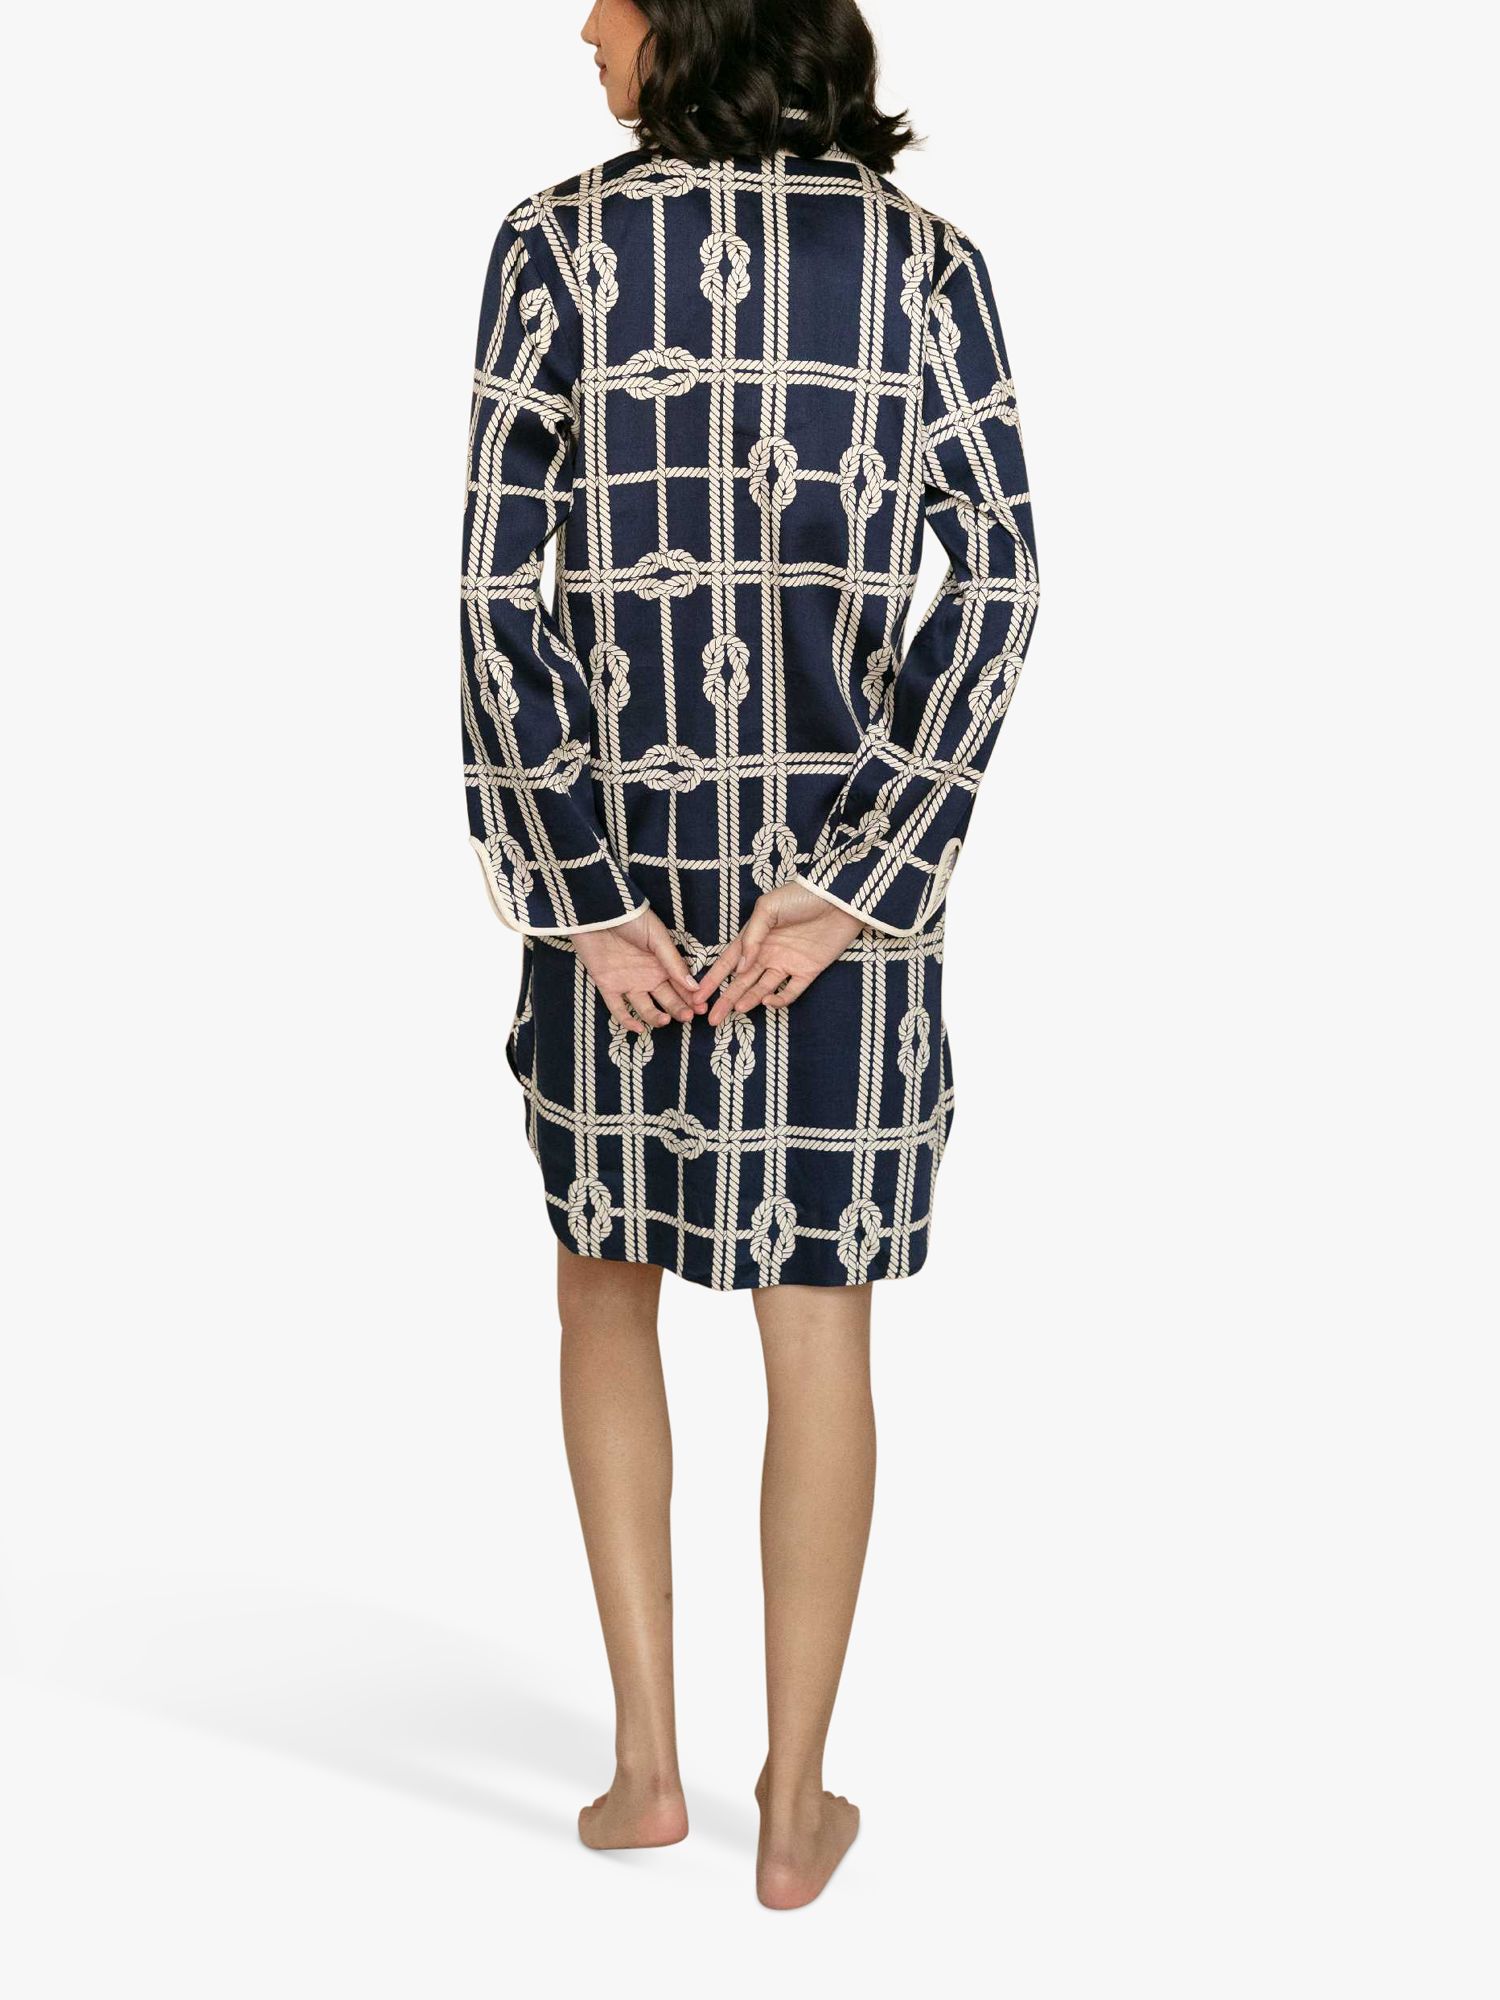 Buy Fable & Eve Rope Print Nightshirt, Navy Mix Online at johnlewis.com